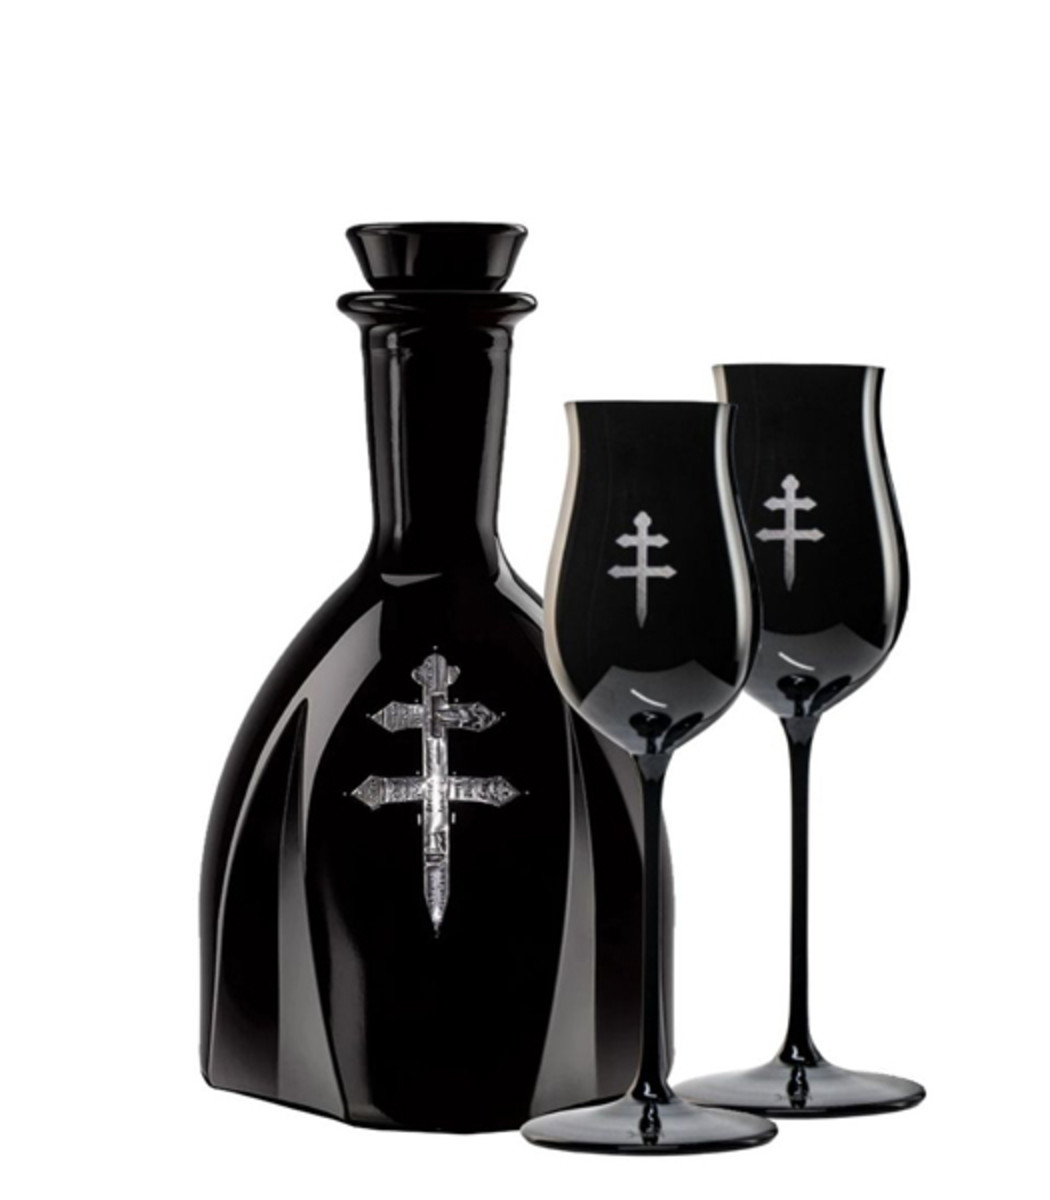 The Limited Edition D'USSE XO & Riedel Glass Set is likely to sell out once again.